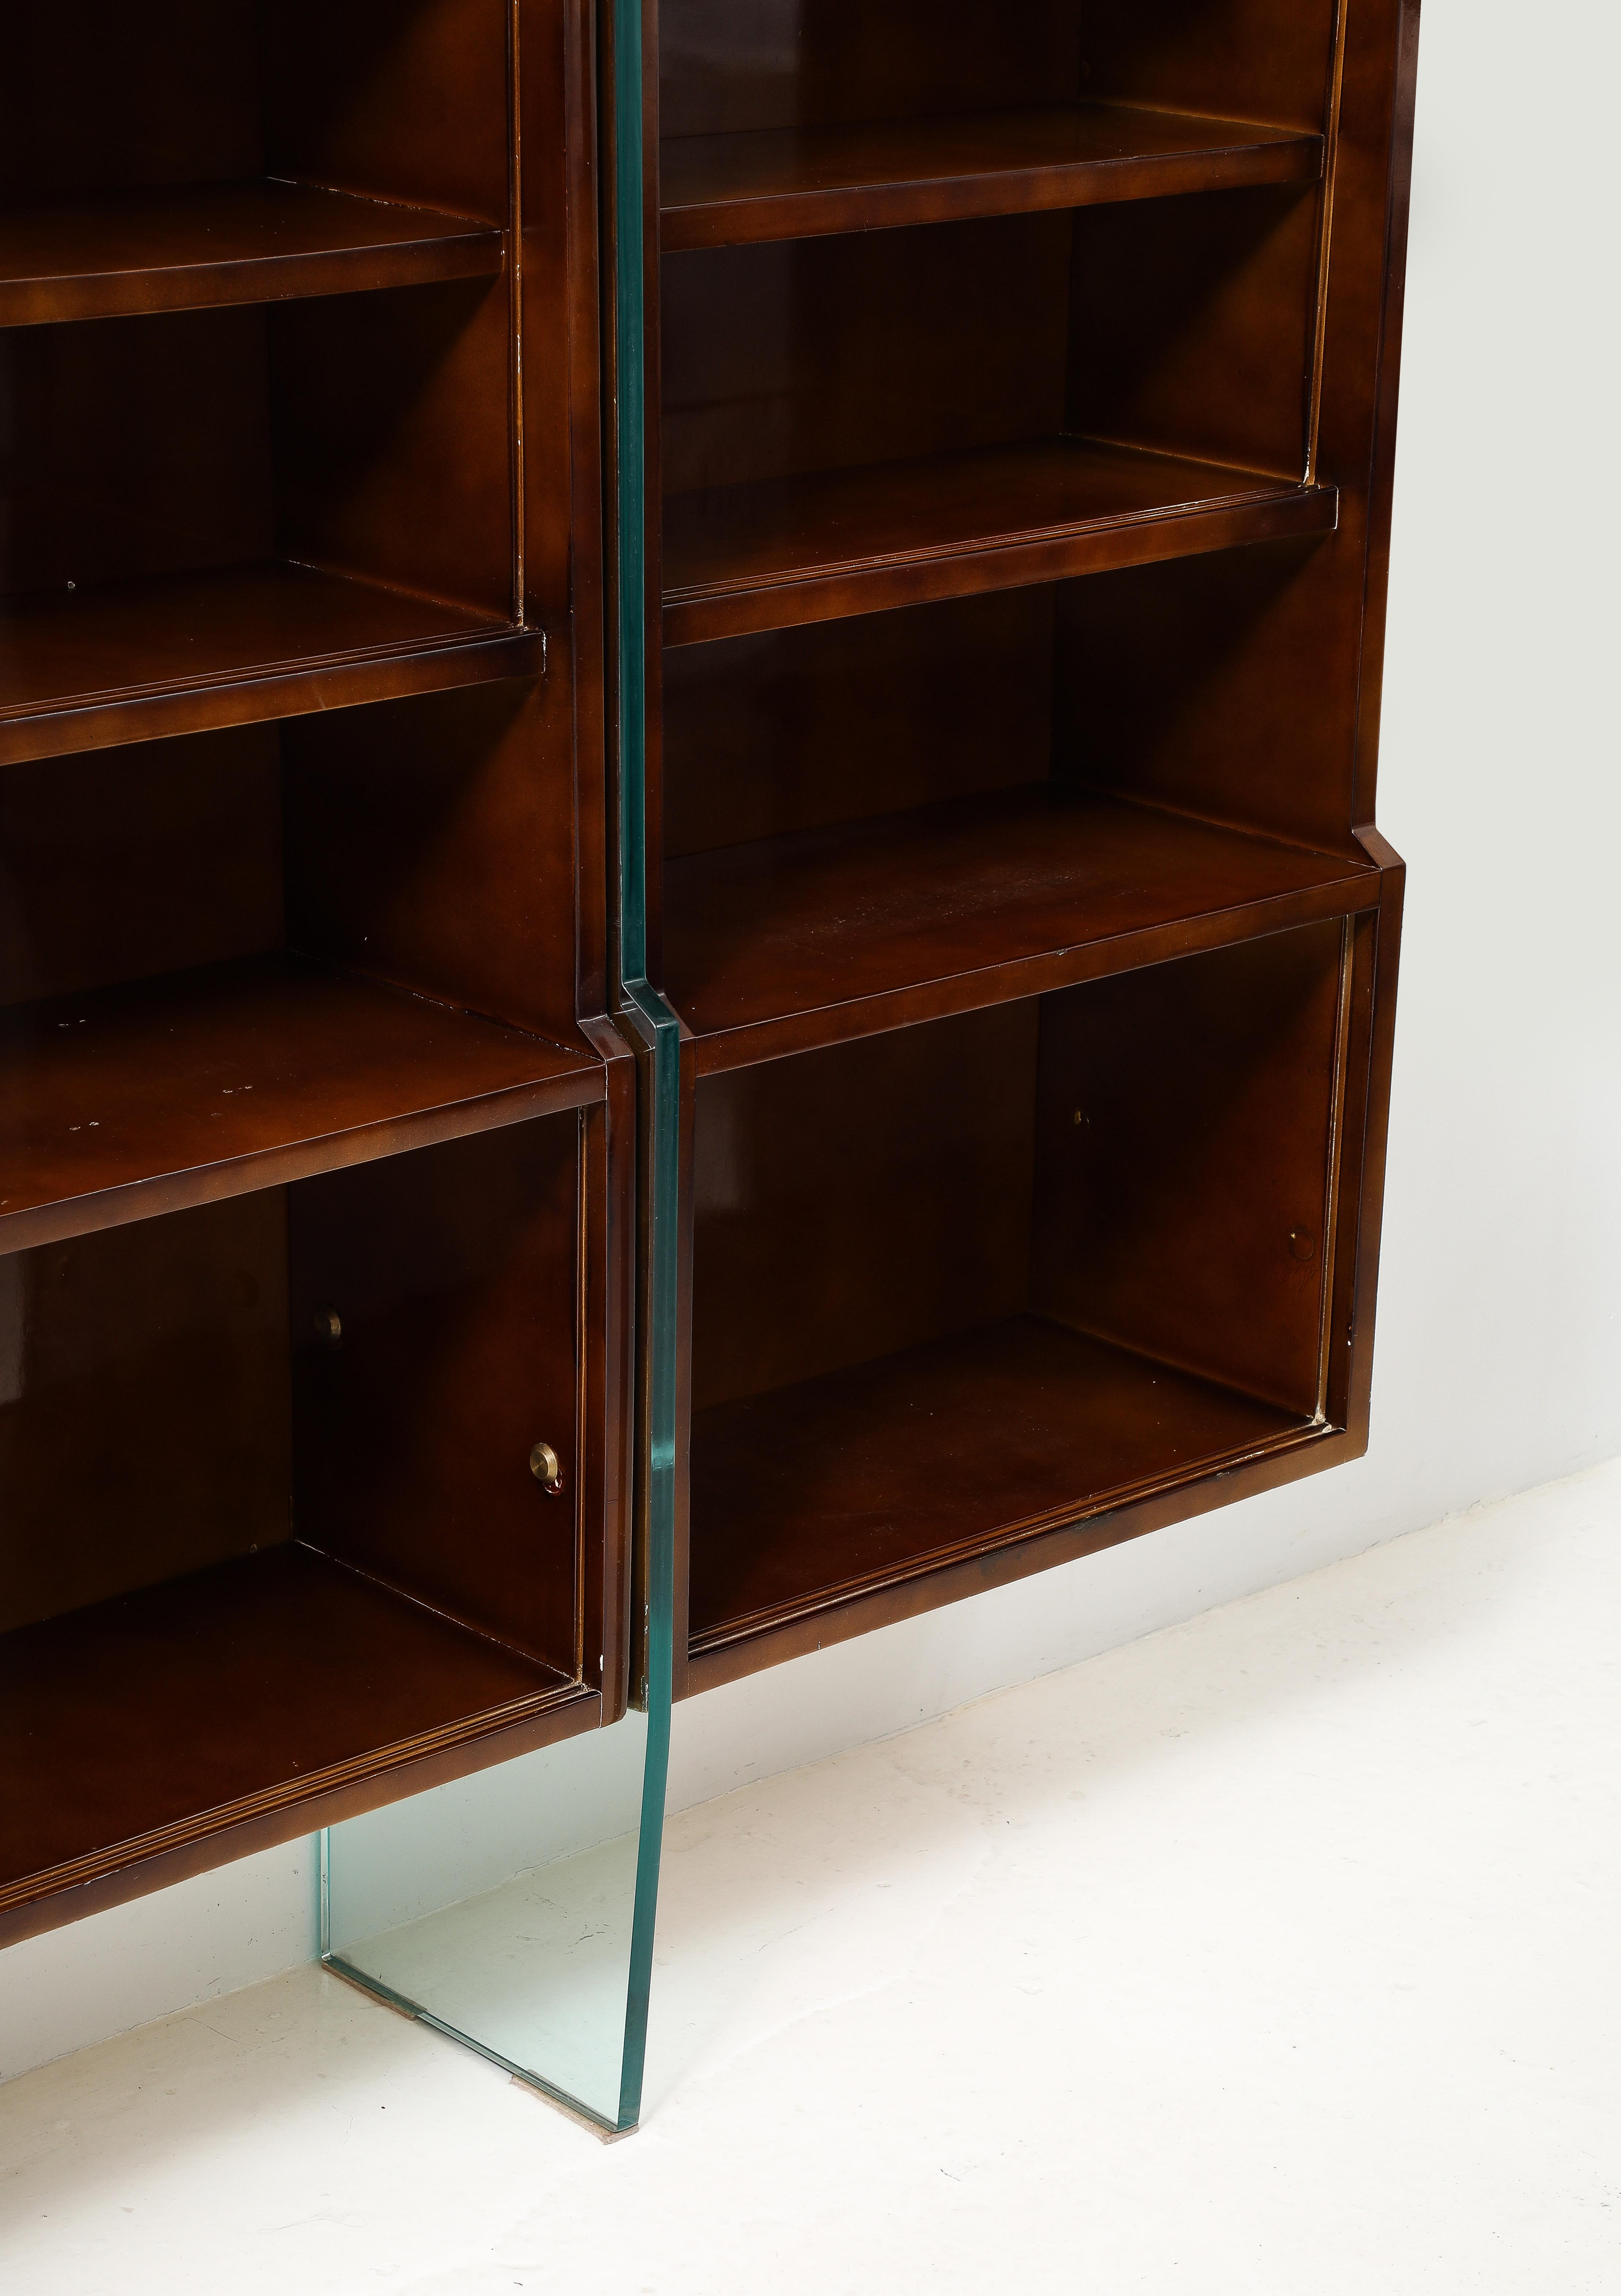 20th Century Raphael Raphel Bookcase in Lacquered Wood & Glass, France 1950's For Sale